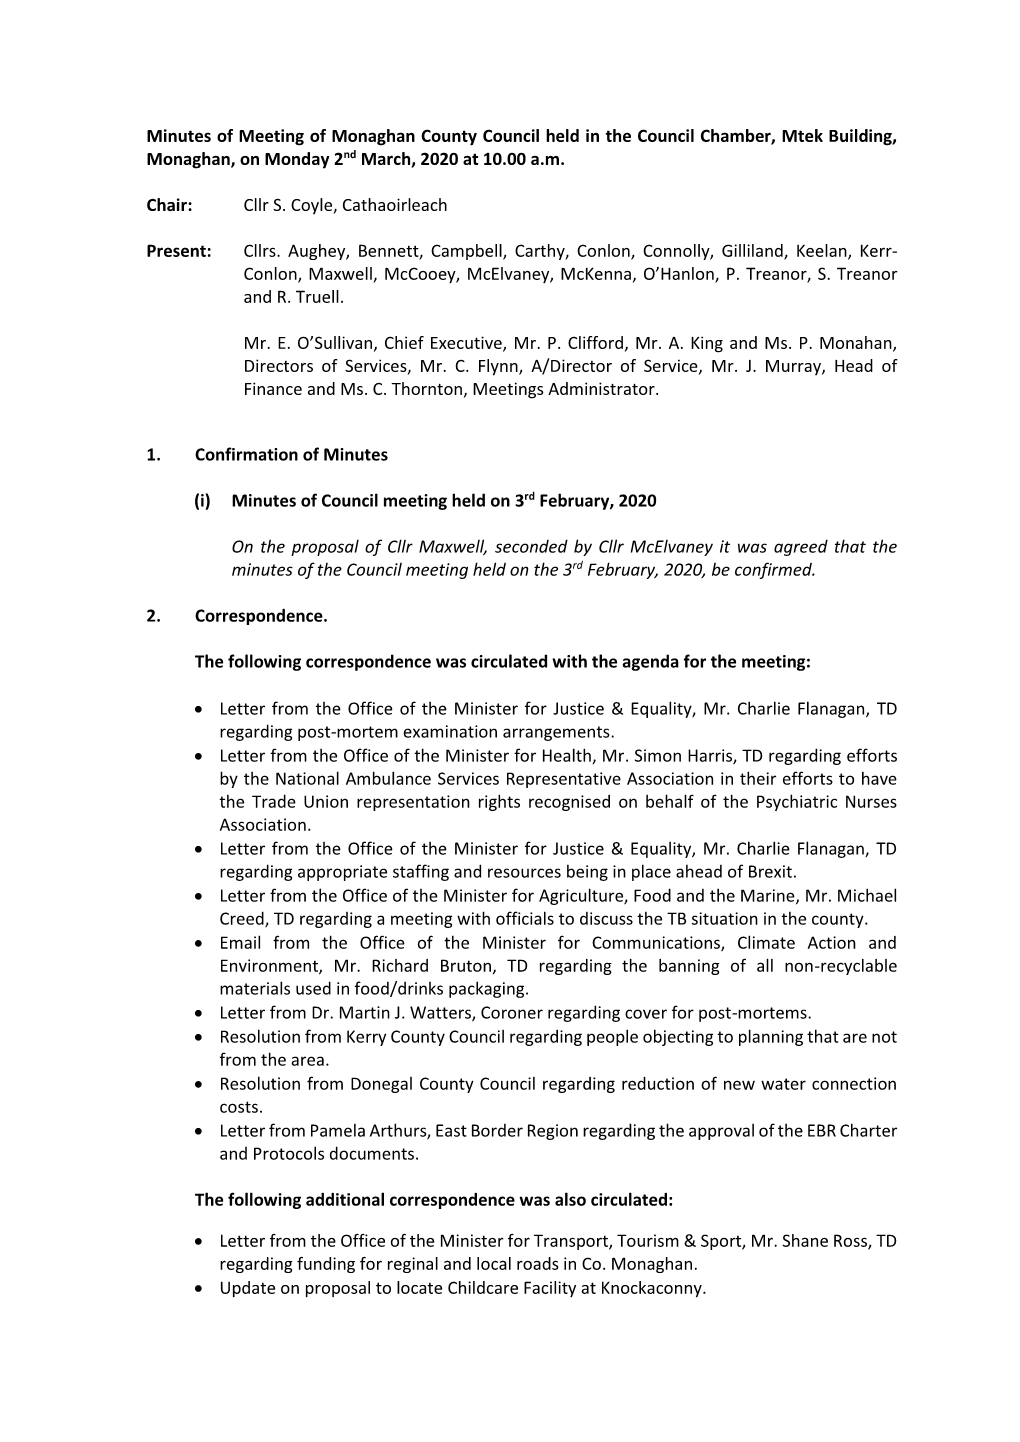 Council Meeting Minutes 2Nd March 2020